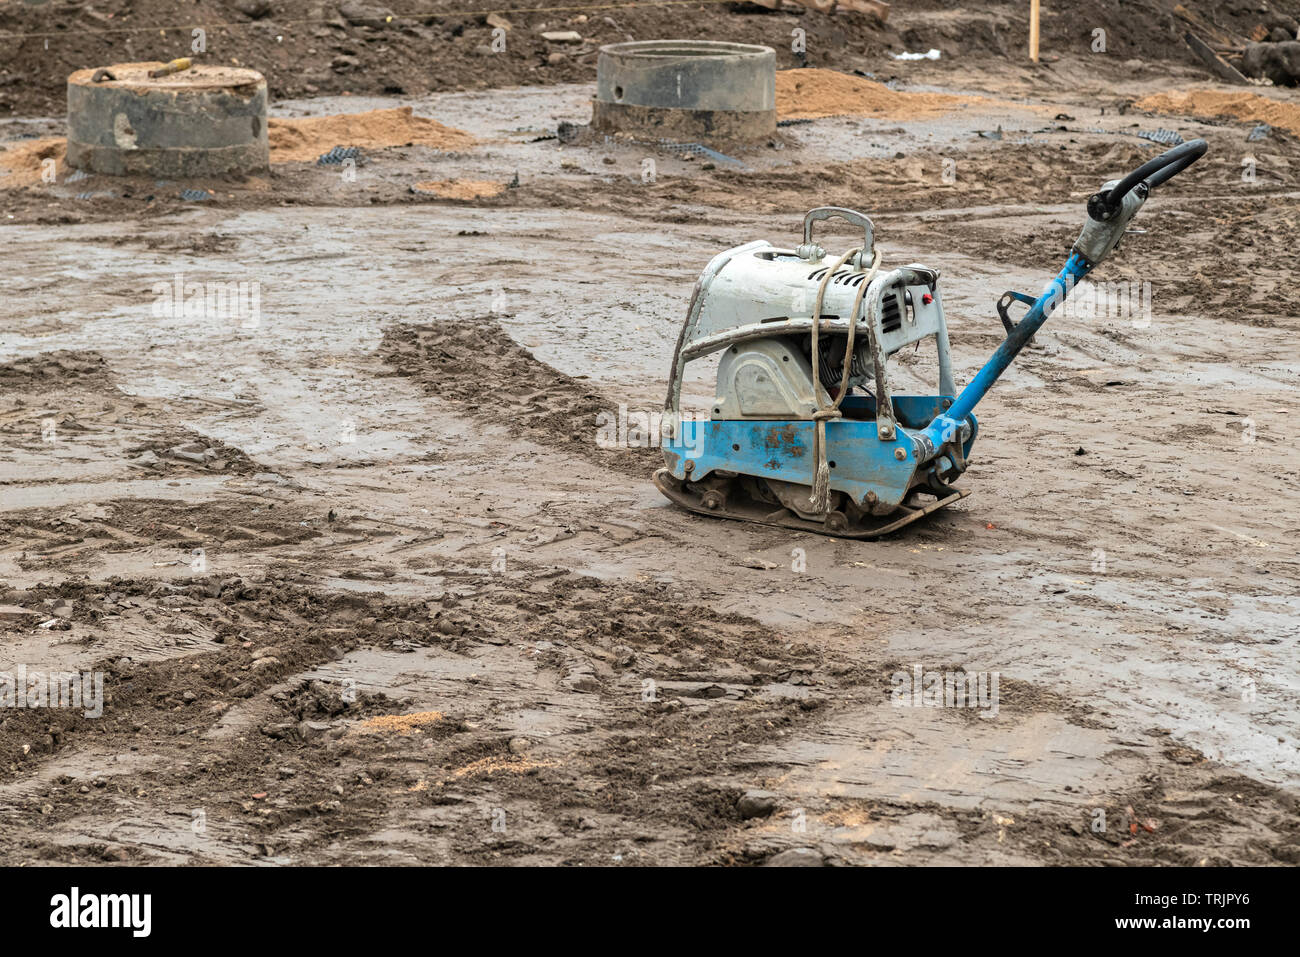 Plate compactor on the ground at construction site. Vibratory hammer power tool, jumping jack machine compressing ground Stock Photo